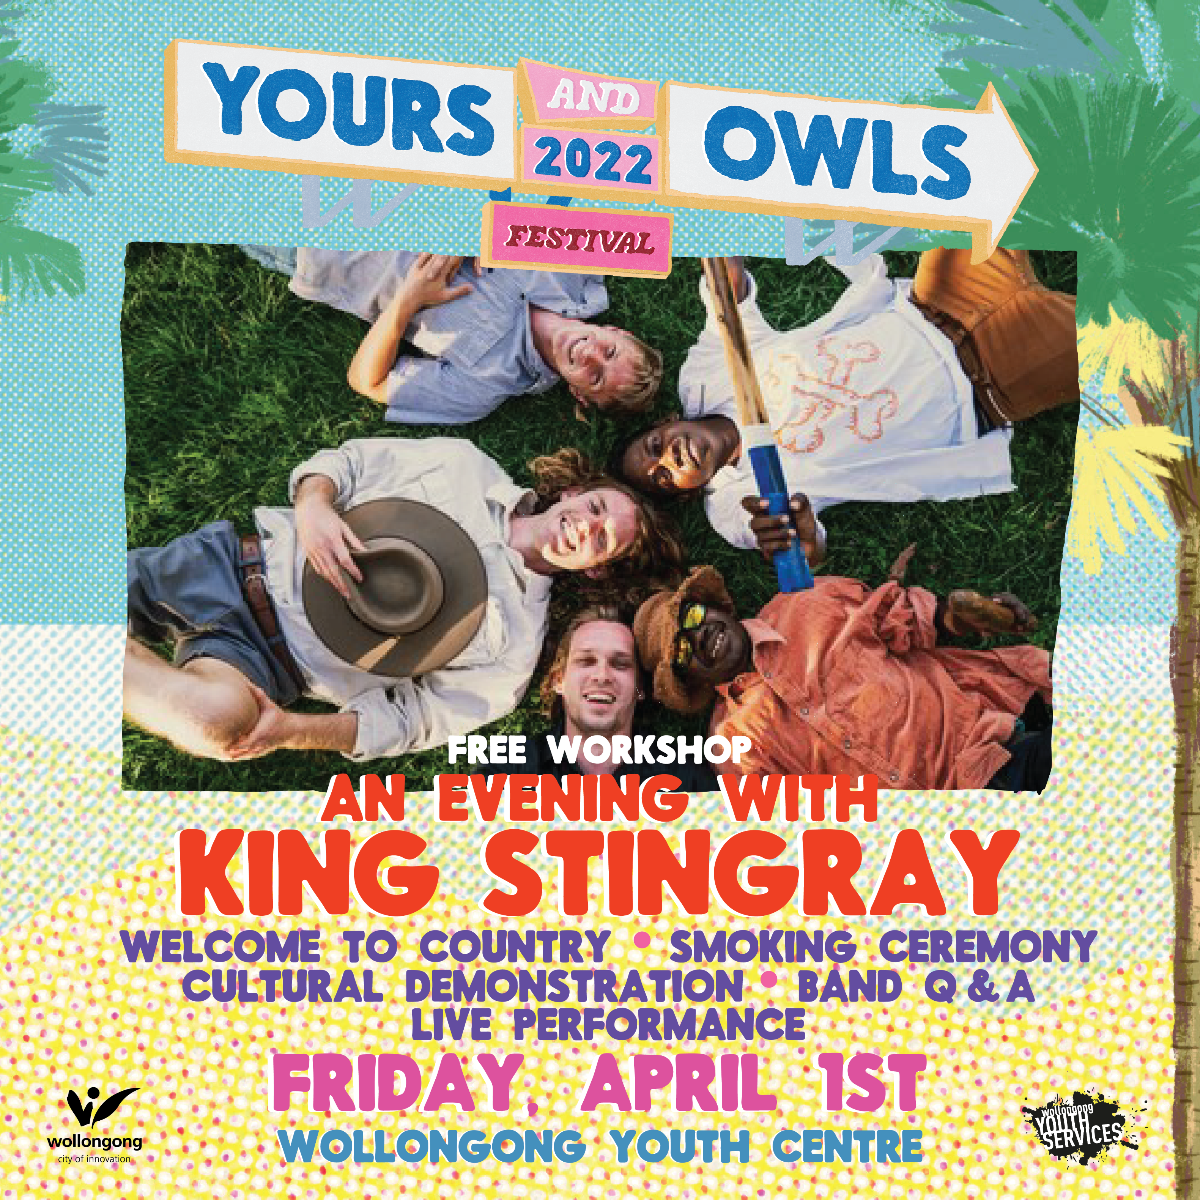 Yours & Owls Festival Going Ahead!